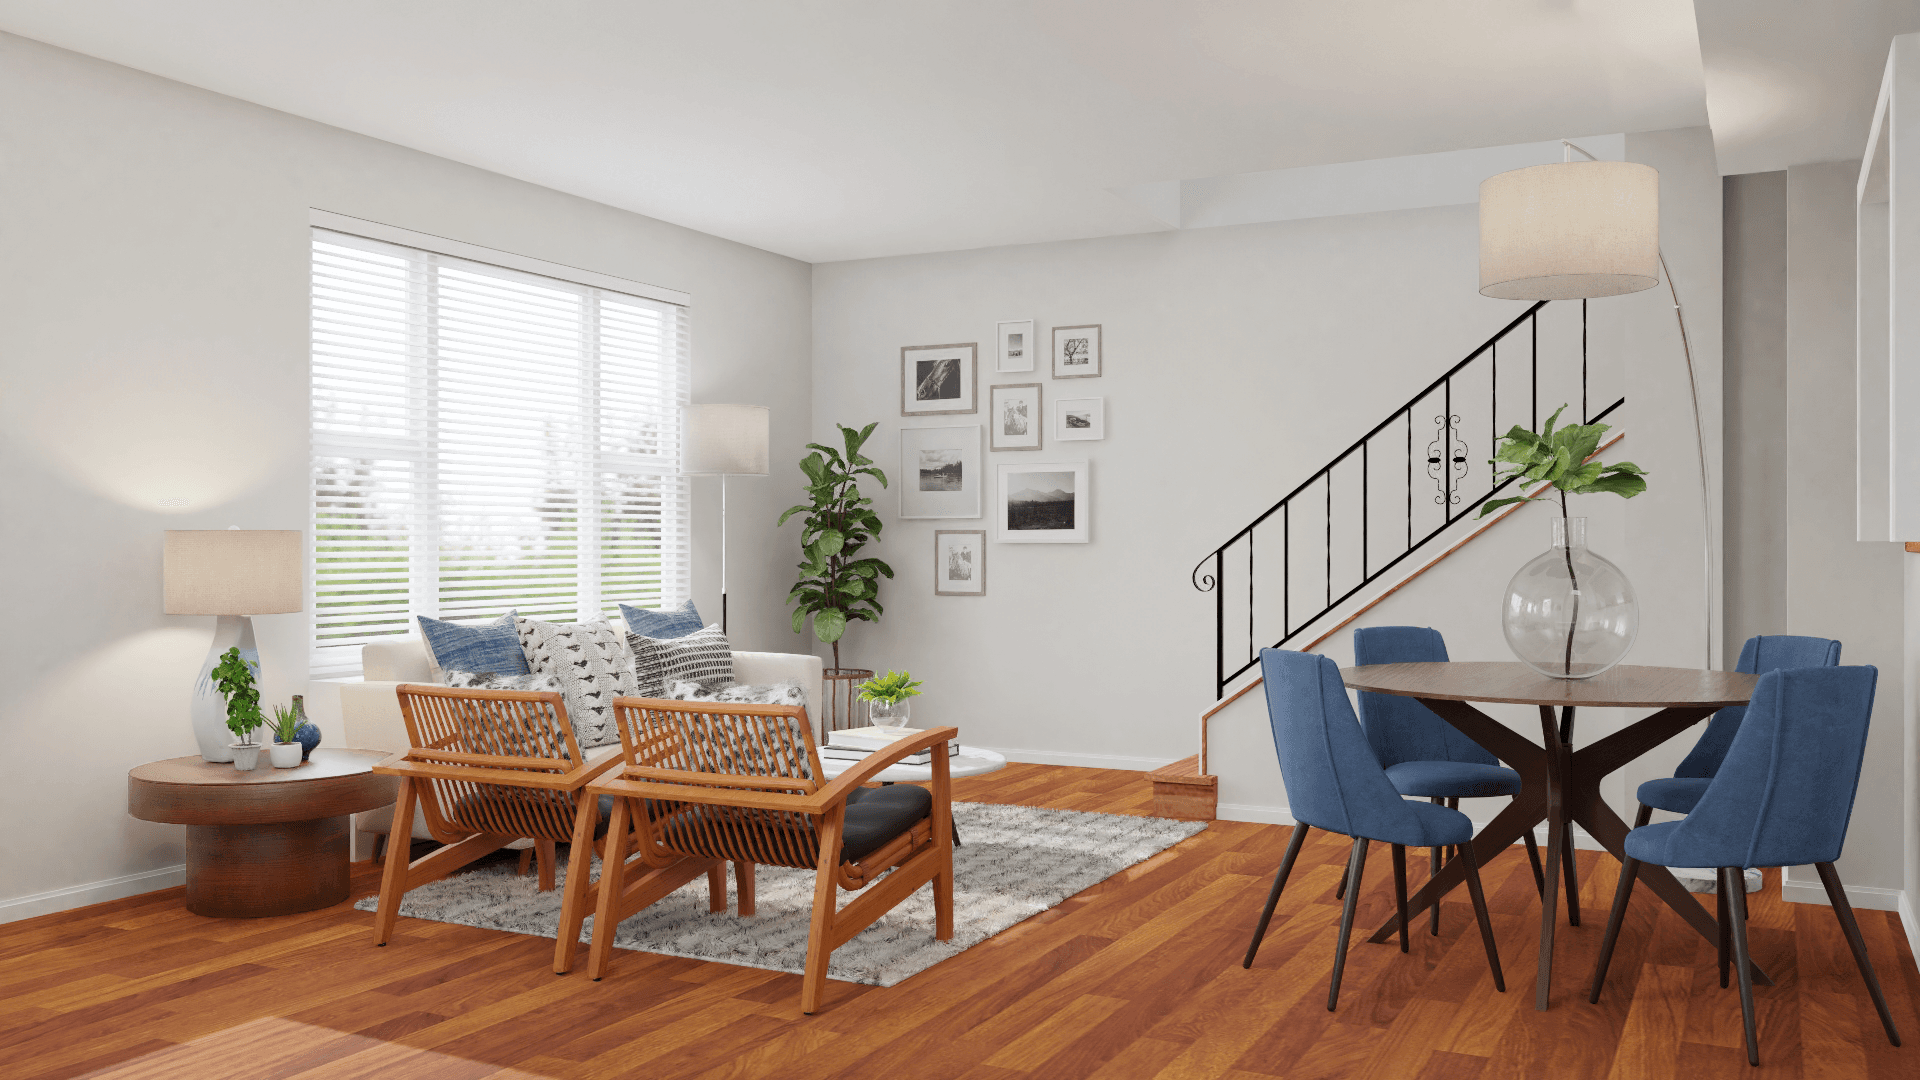 A Bright & Compact Mid-Century Modern Living Room